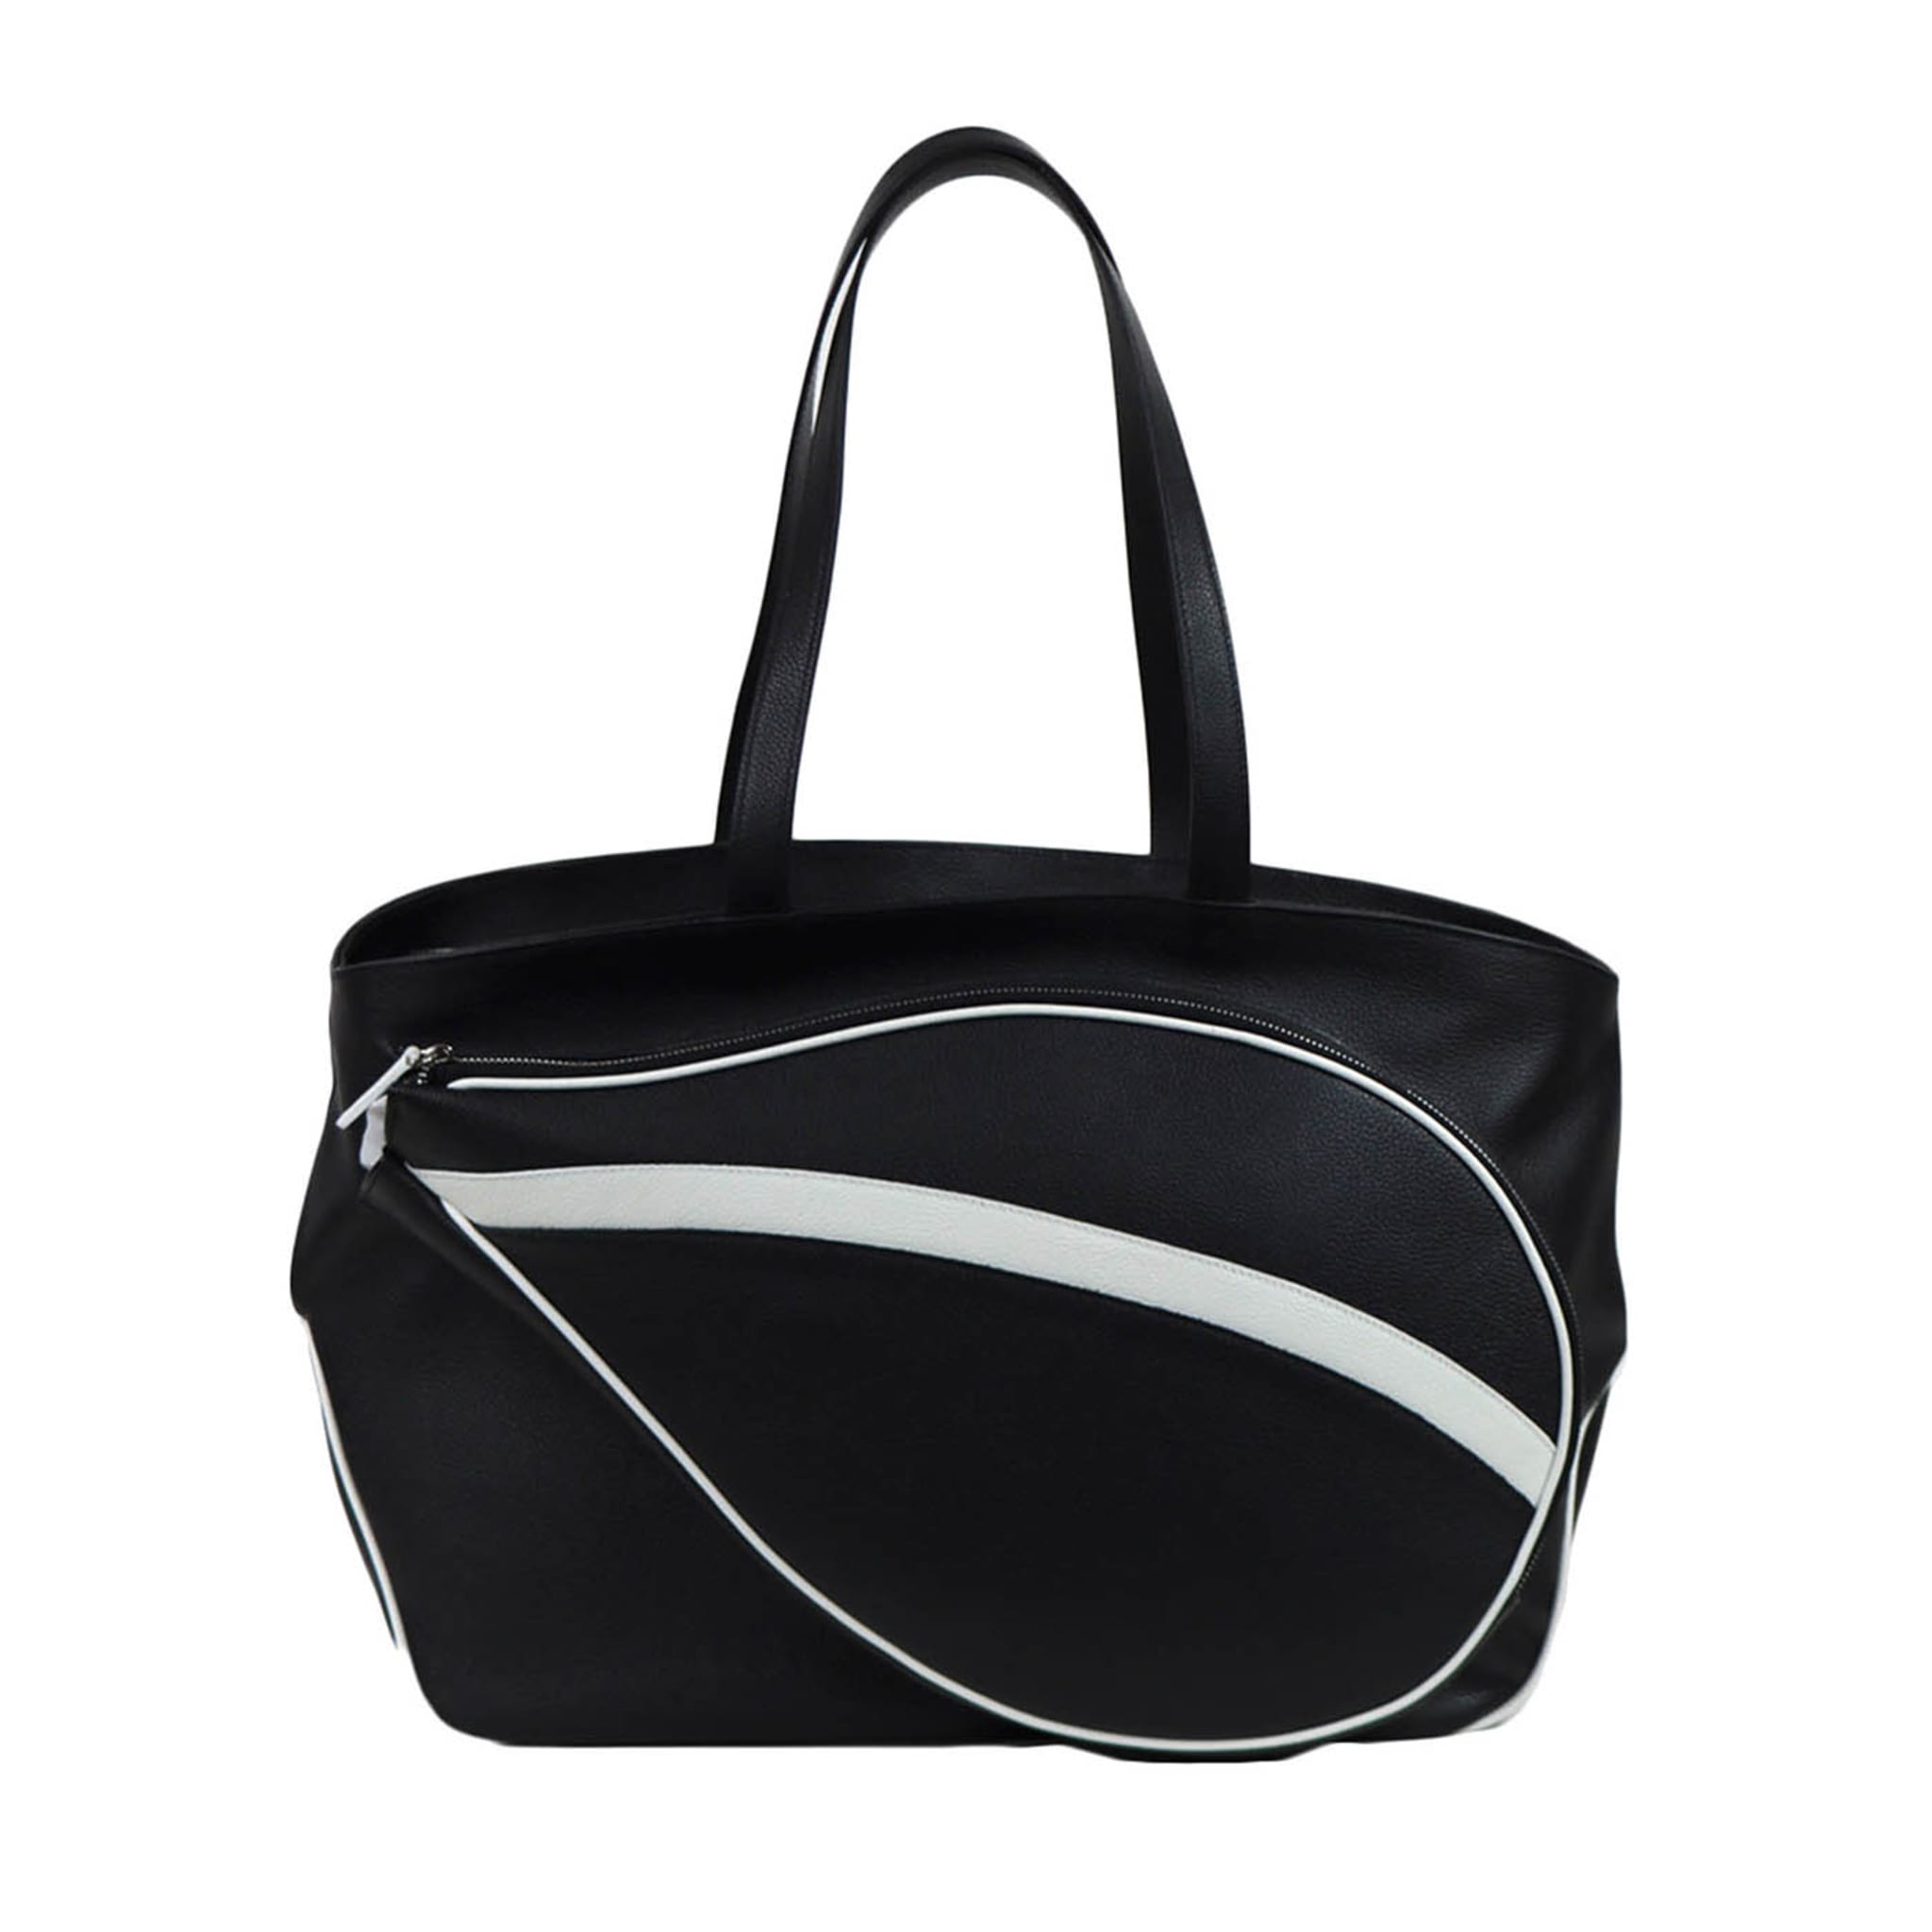 Sport Black & White Bag with Tennis-Racket-Shaped Pocket - Main view